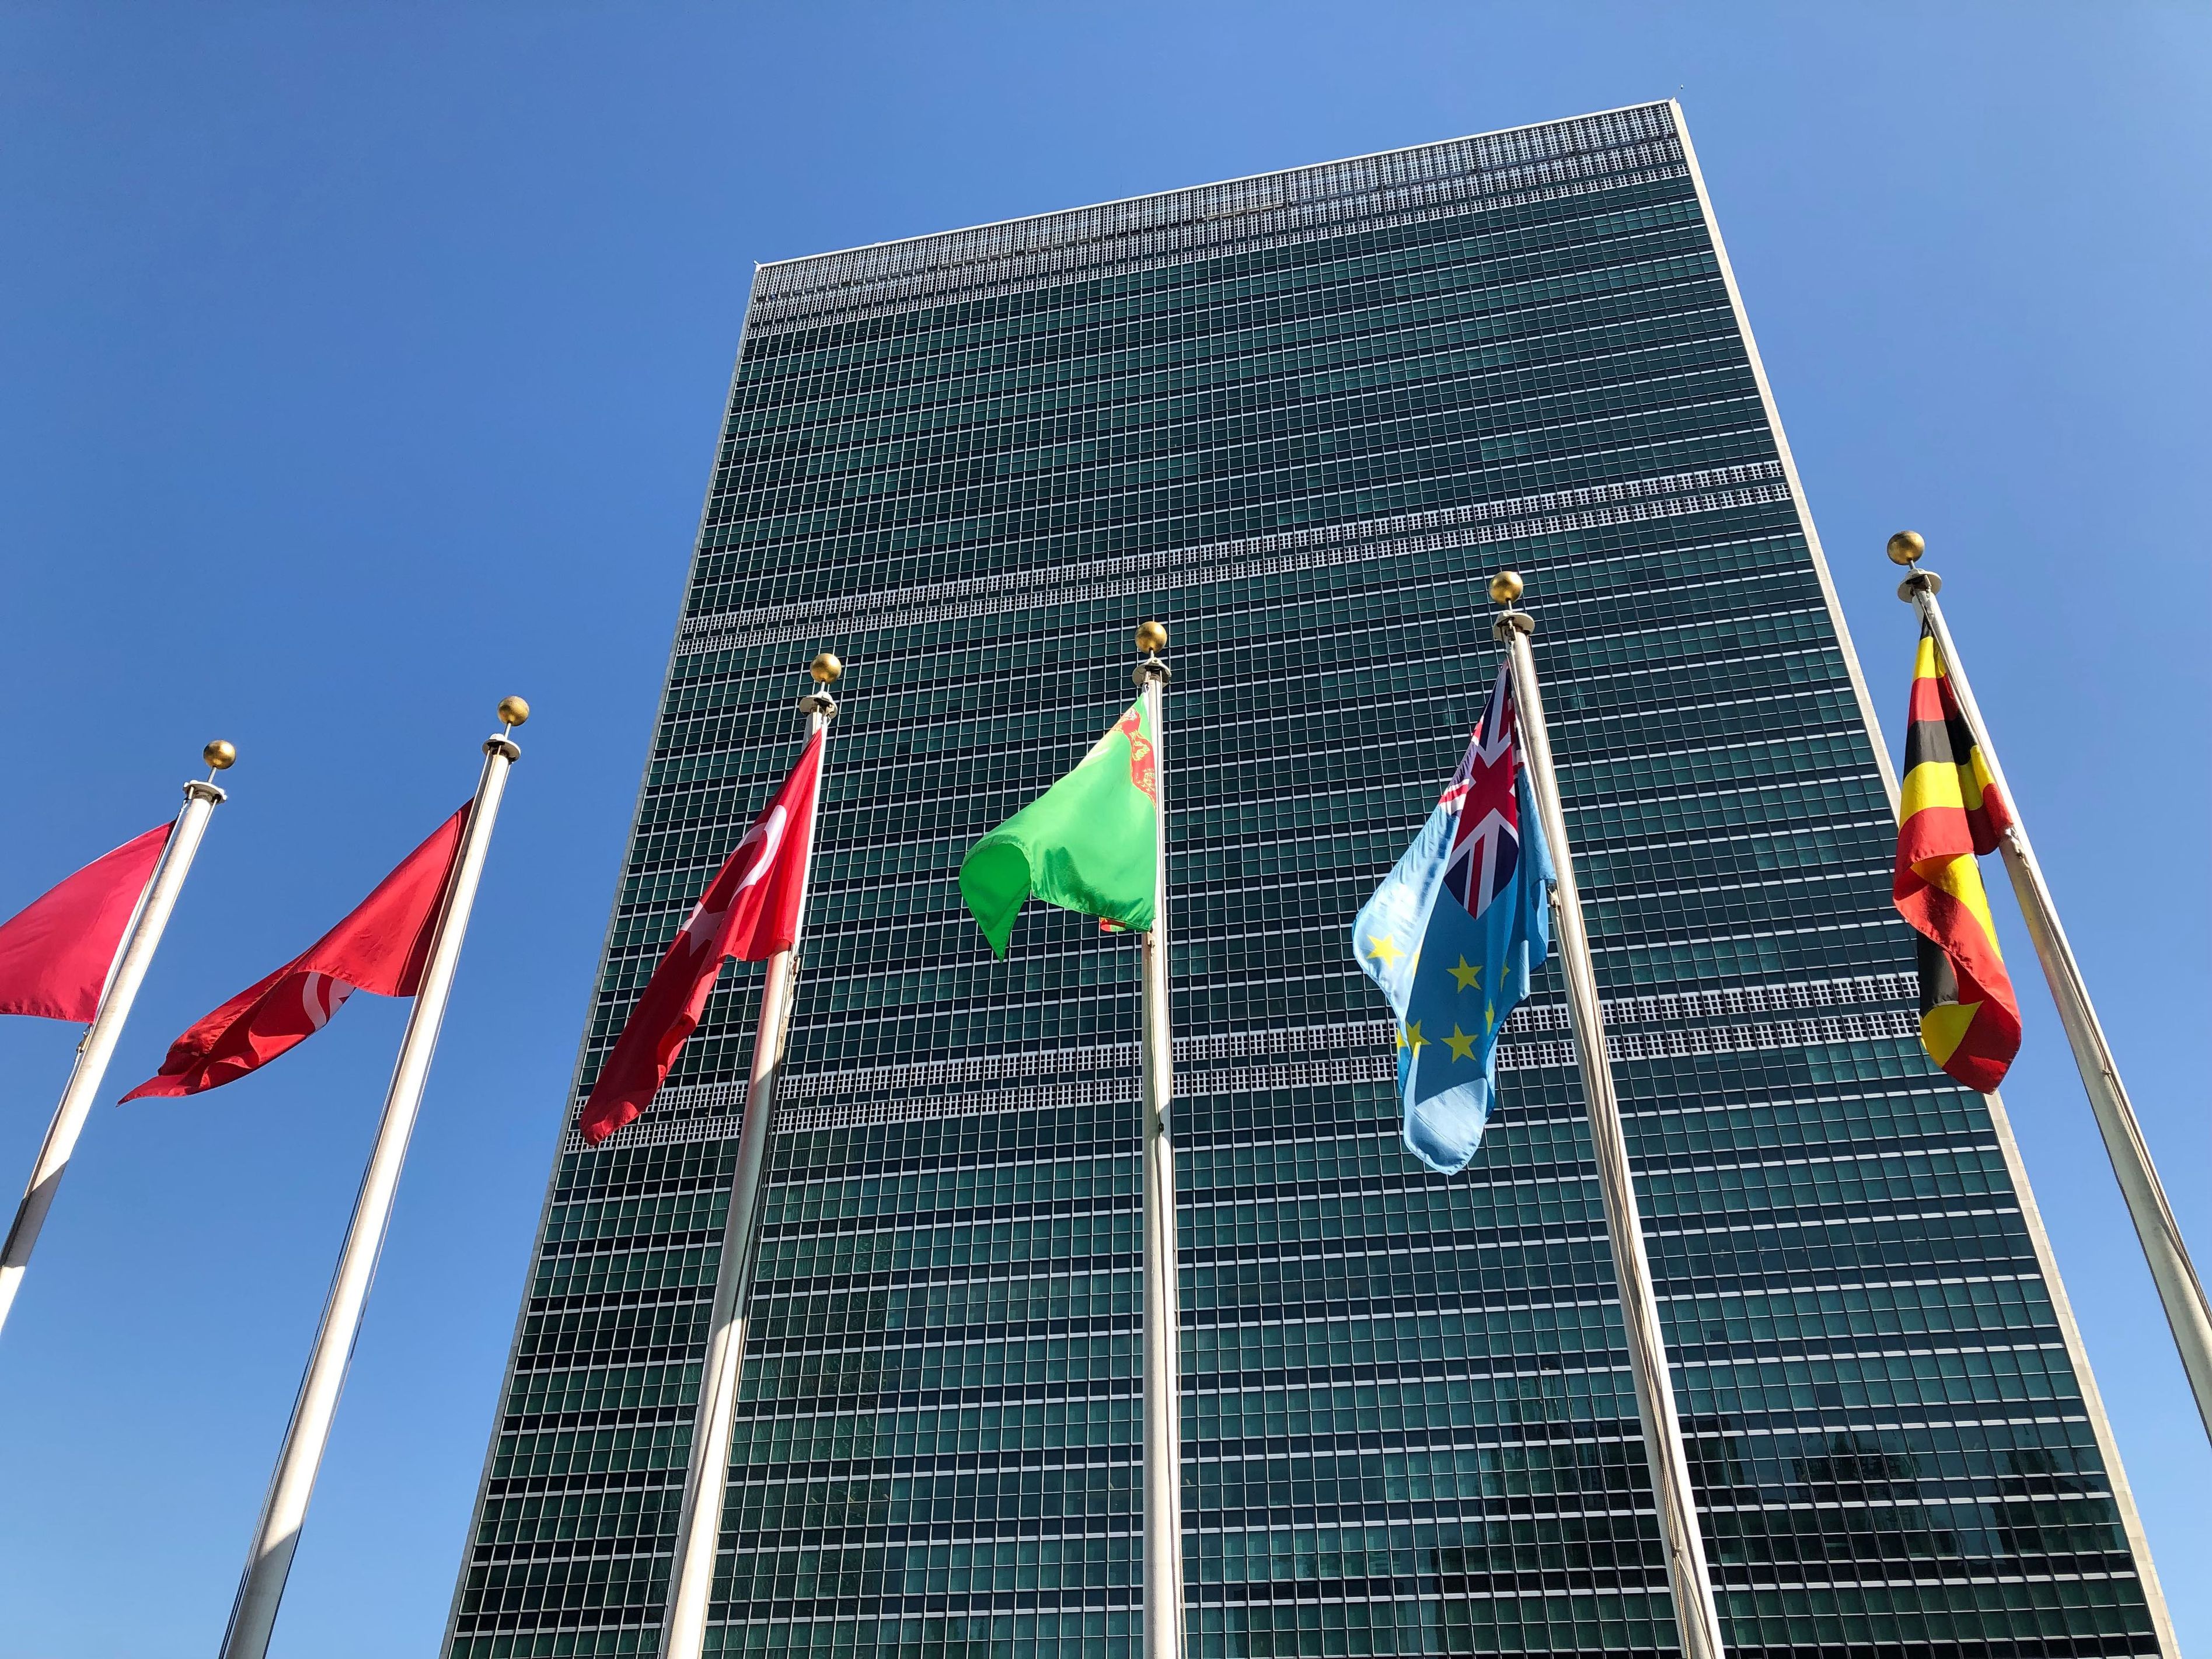 UN asked for digital neutrality during armed conflicts